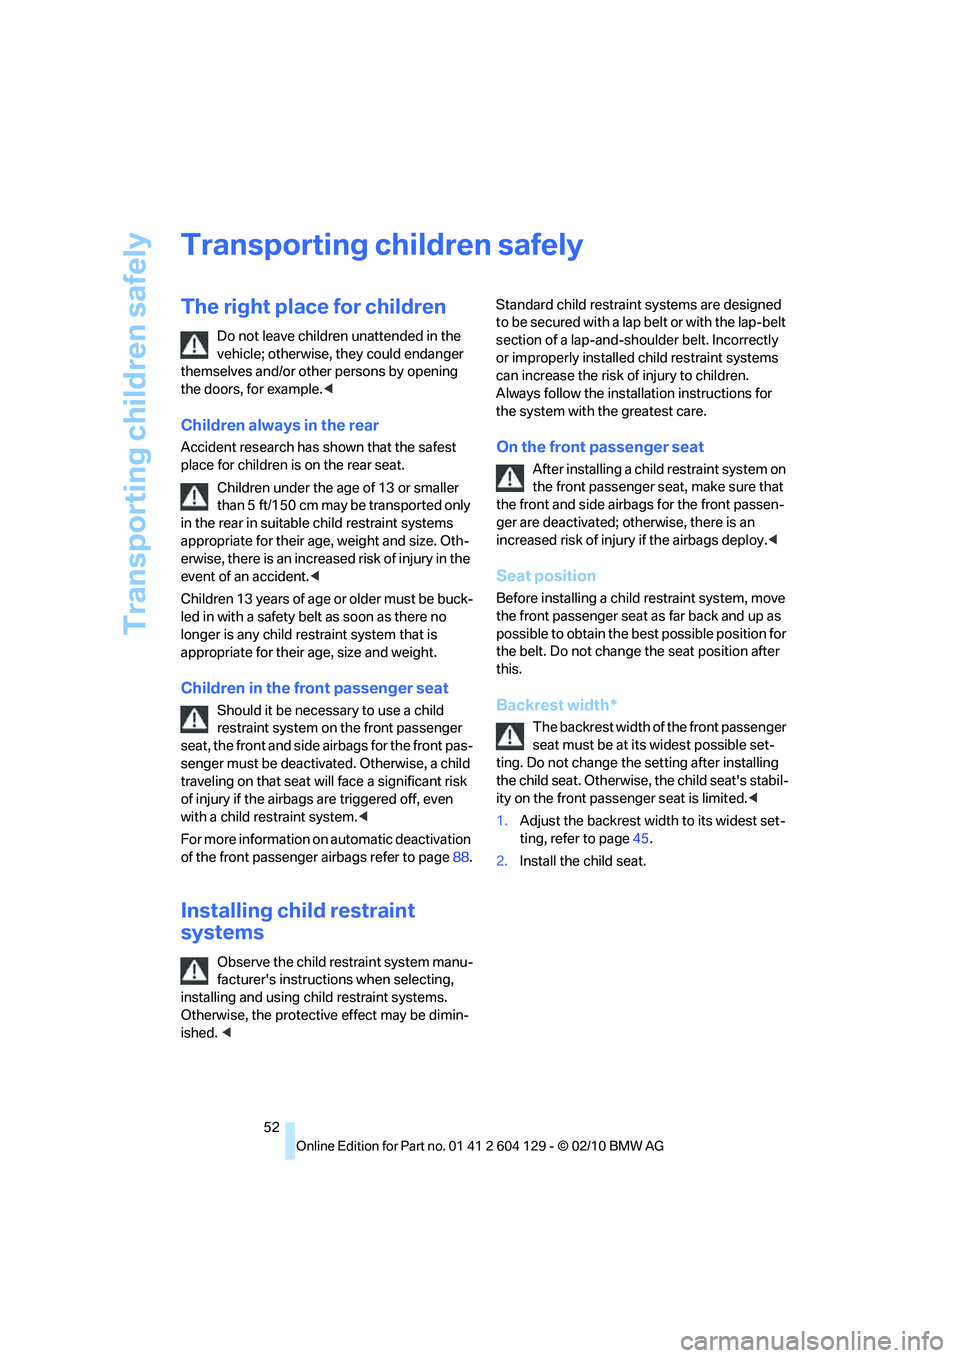 BMW 1 SERIES 2011 Workshop Manual Transporting children safely
52
Transporting children safely
The right place for children
Do not leave children unattended in the 
vehicle; otherwise, they could endanger 
themselves and/or other pers